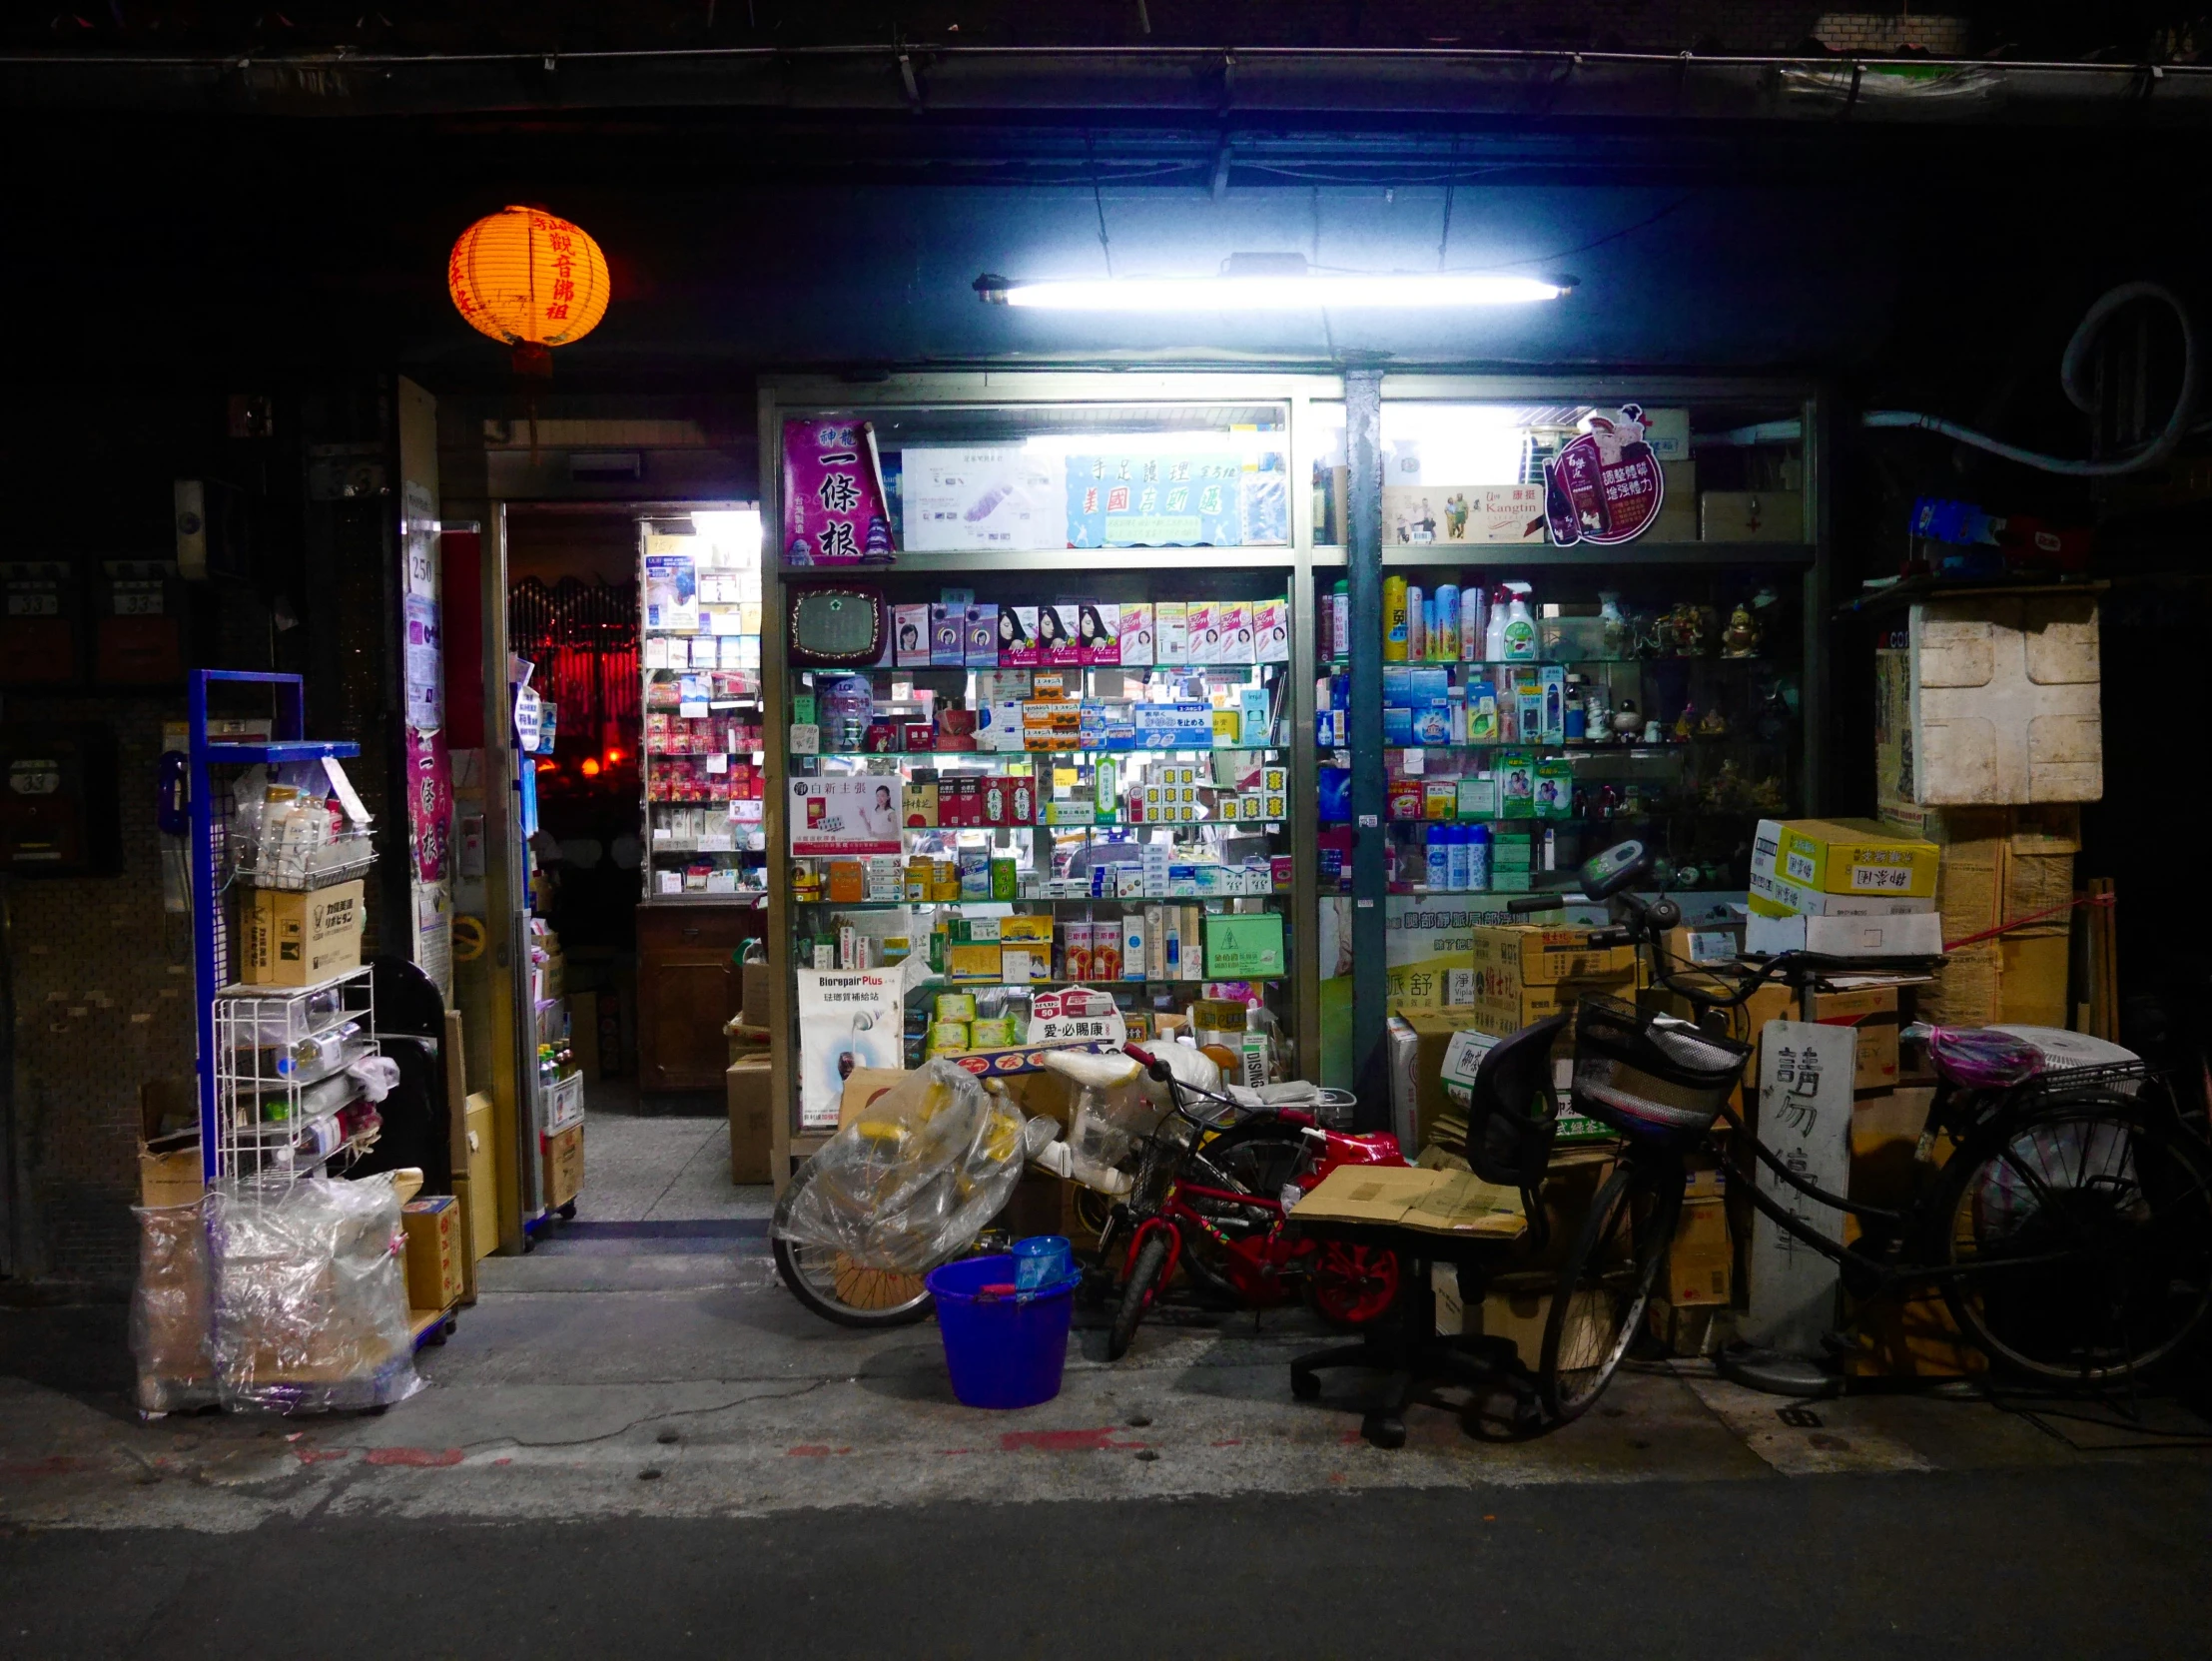 the bicycle shop is very dark and littered with bottles and various goods